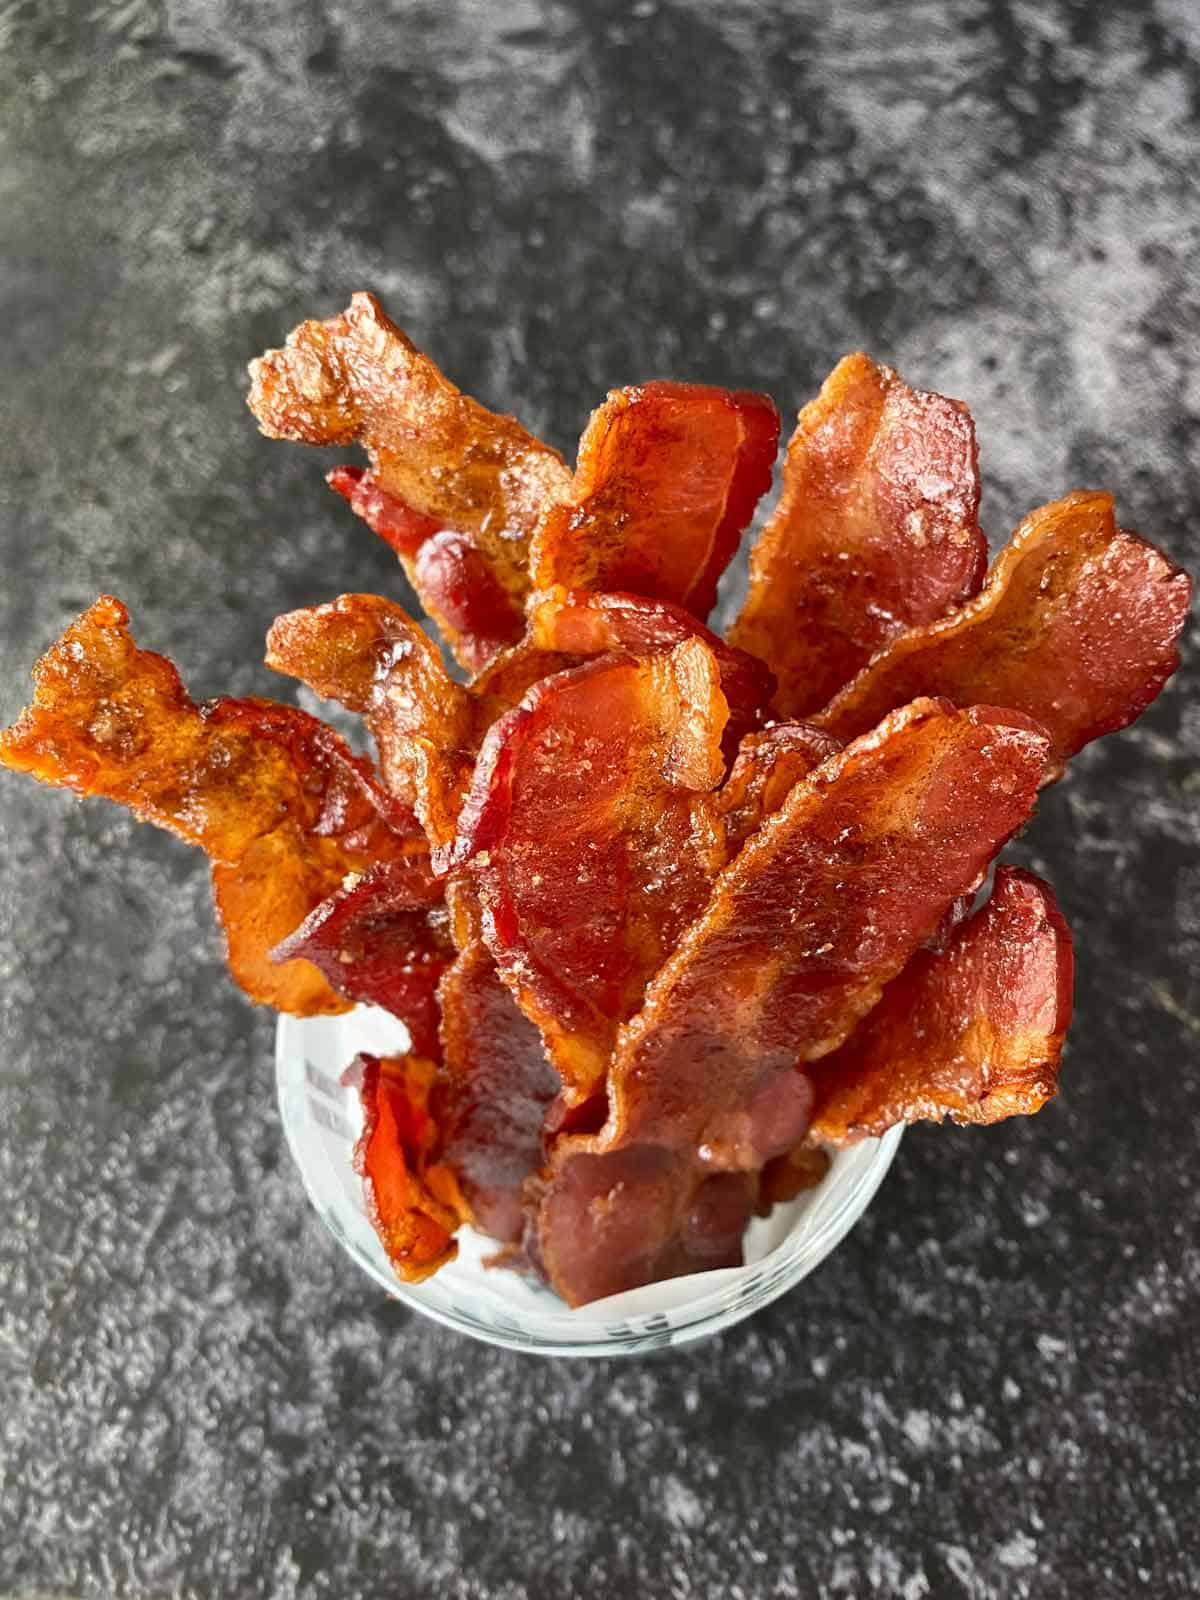 Cracked bacon strips arranged in a cup for serving.